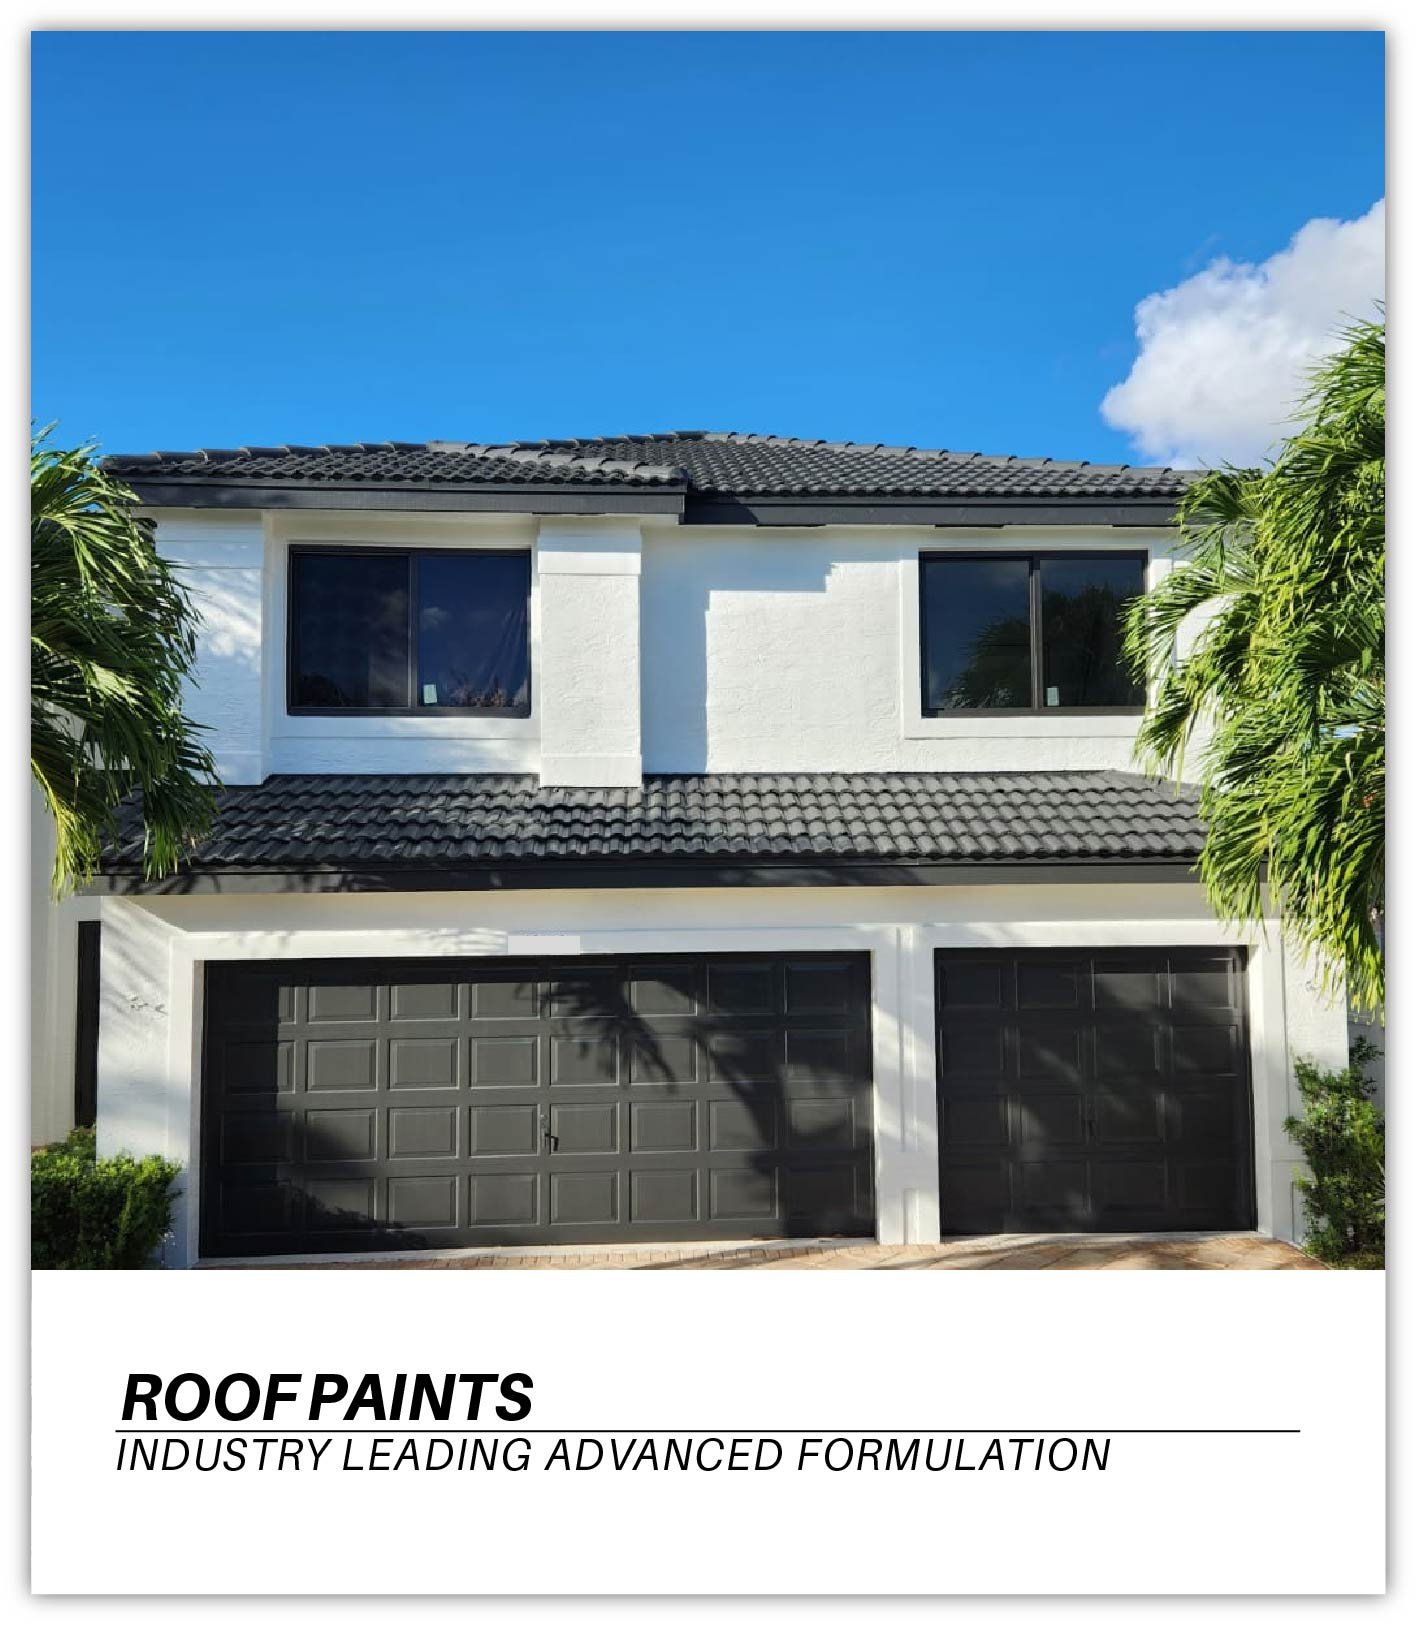 South Florida Roof Paints for Roof Tiles and Shingle Tile Roofs